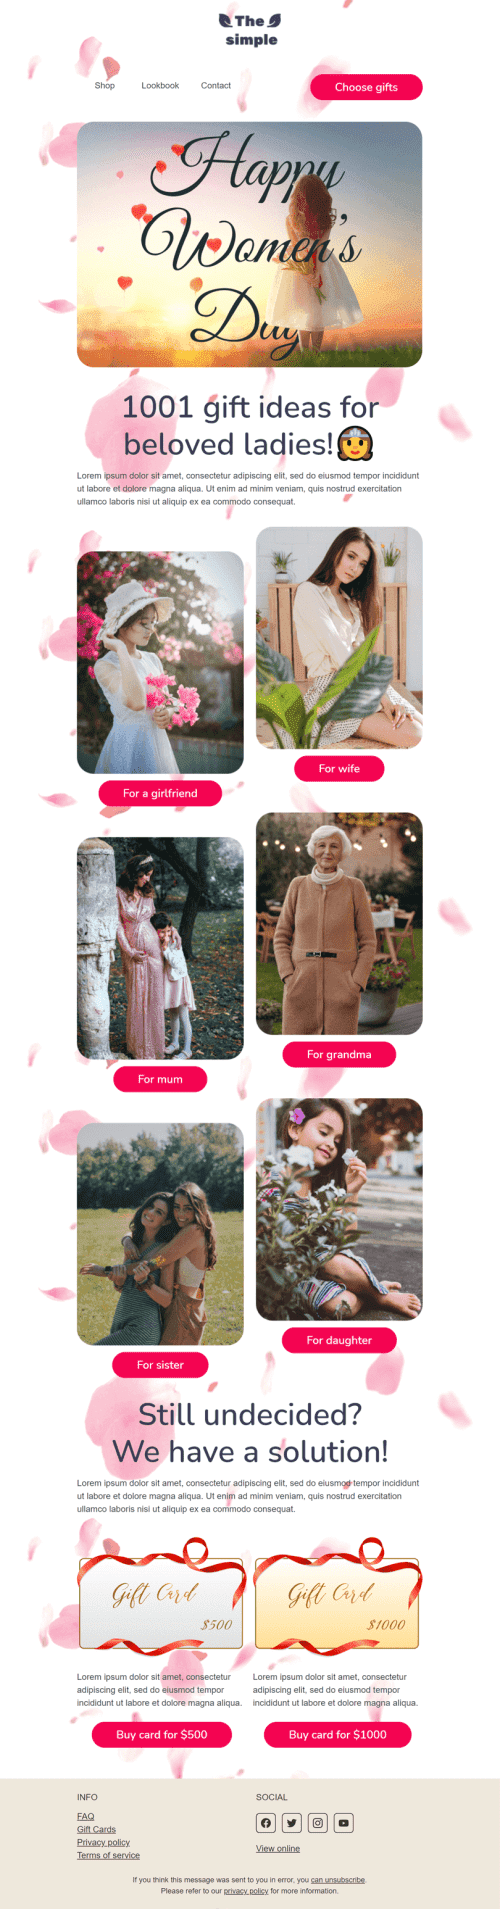 Women's Day Email Template «1001 gift ideas for beloved ladies» for Fashion industry mobile view